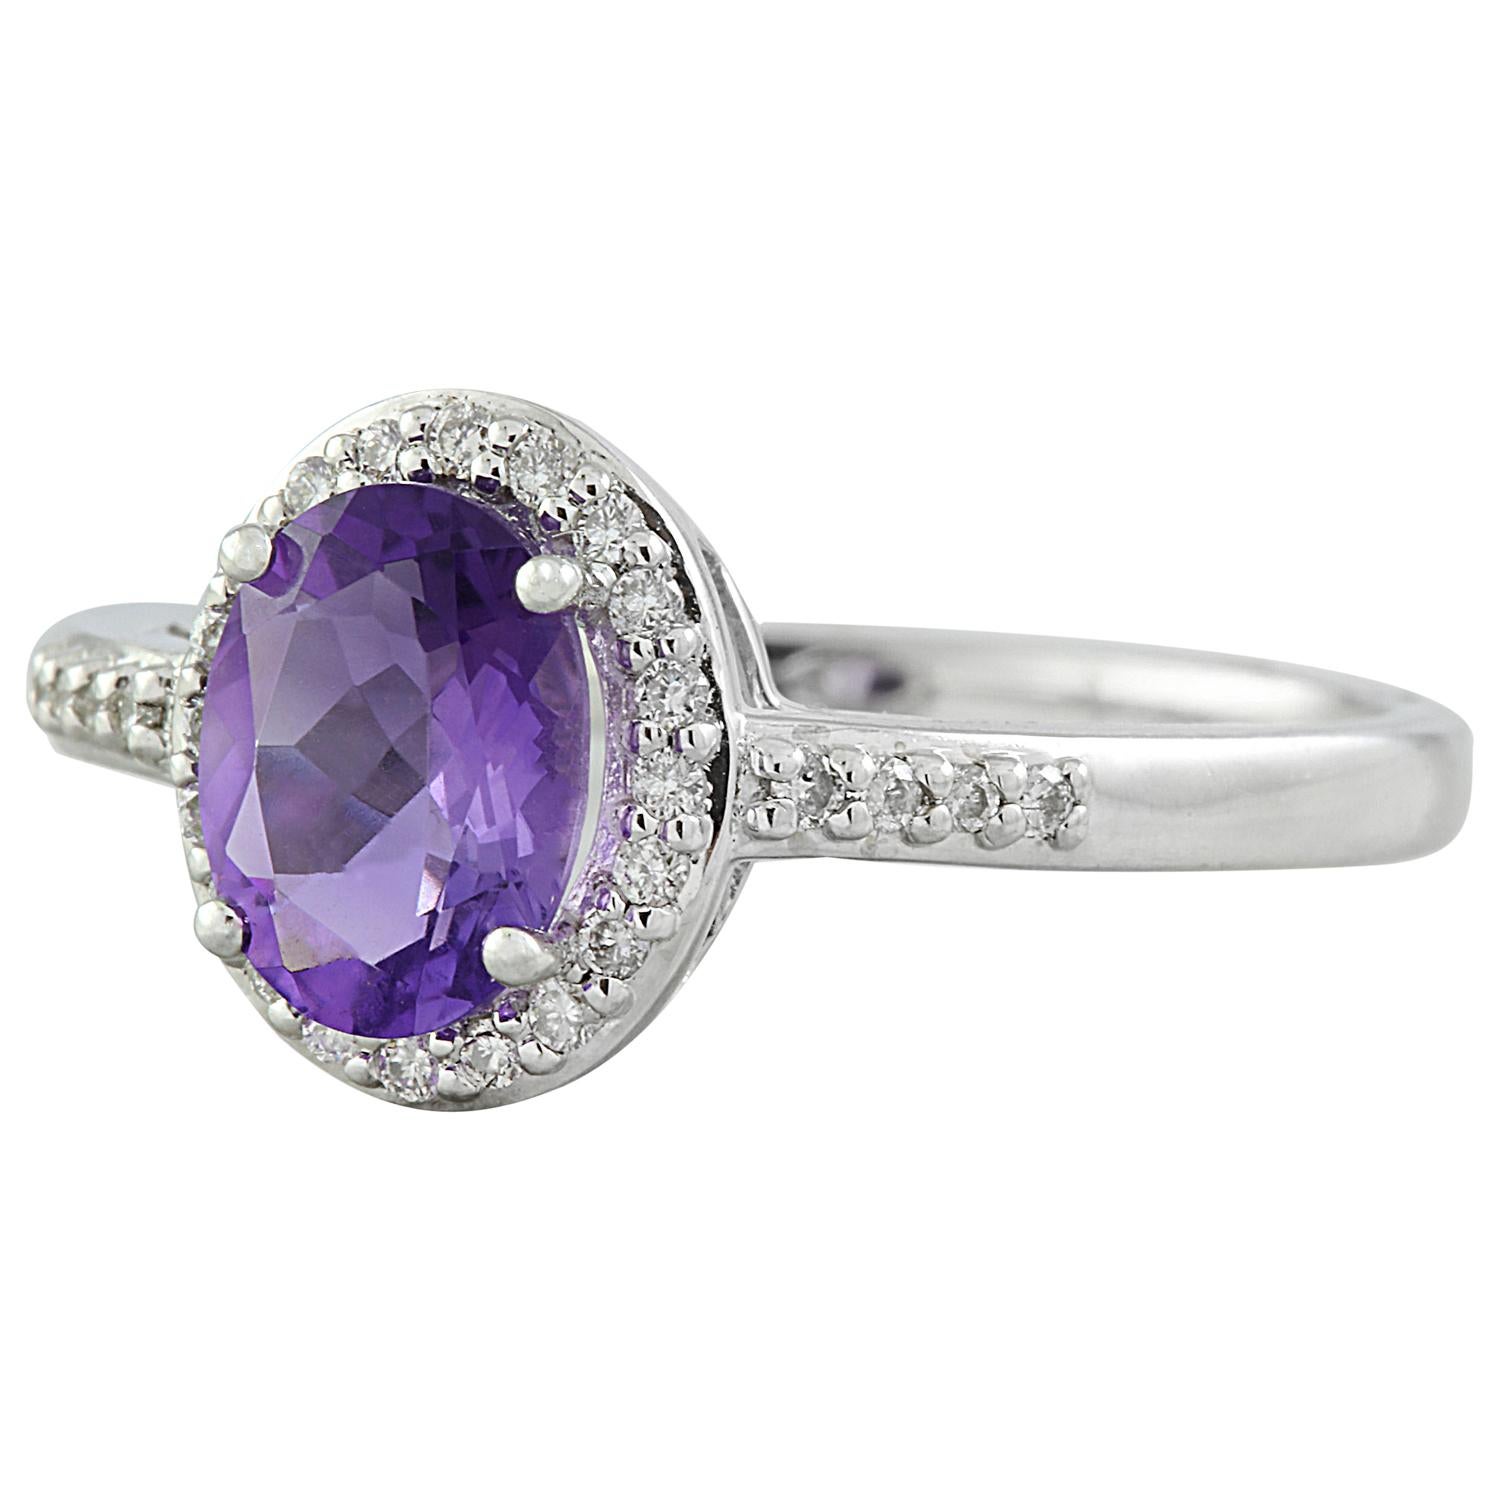 Introducing our exquisite 14K Solid White Gold Diamond Ring, adorned with a captivating 1.16 Carat Natural Amethyst. Crafted to perfection, this stunning piece is stamped with the hallmark of authenticity, ensuring its quality. With a total weight